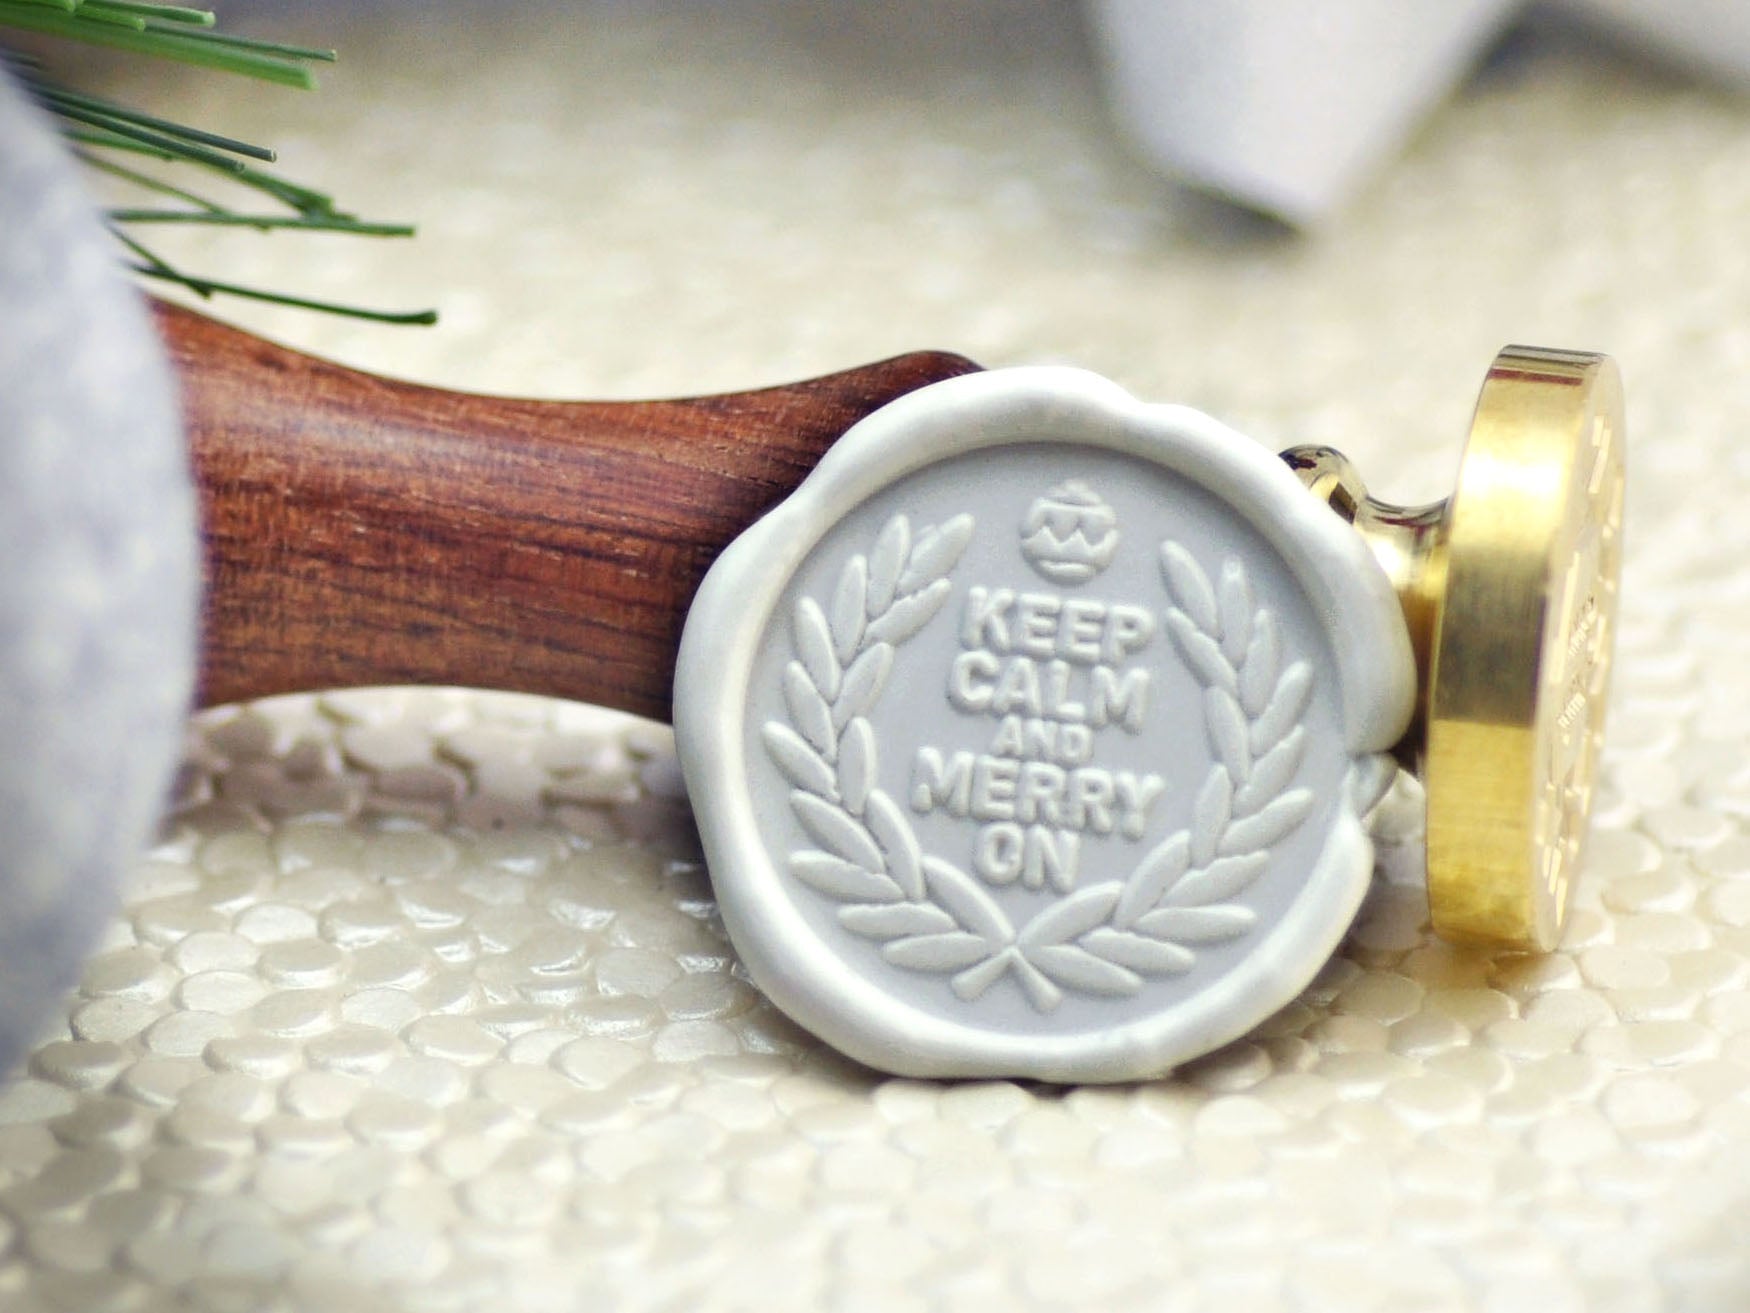 Keep Calm and Merry On - Christmas Collection Wax Seal Stamp by